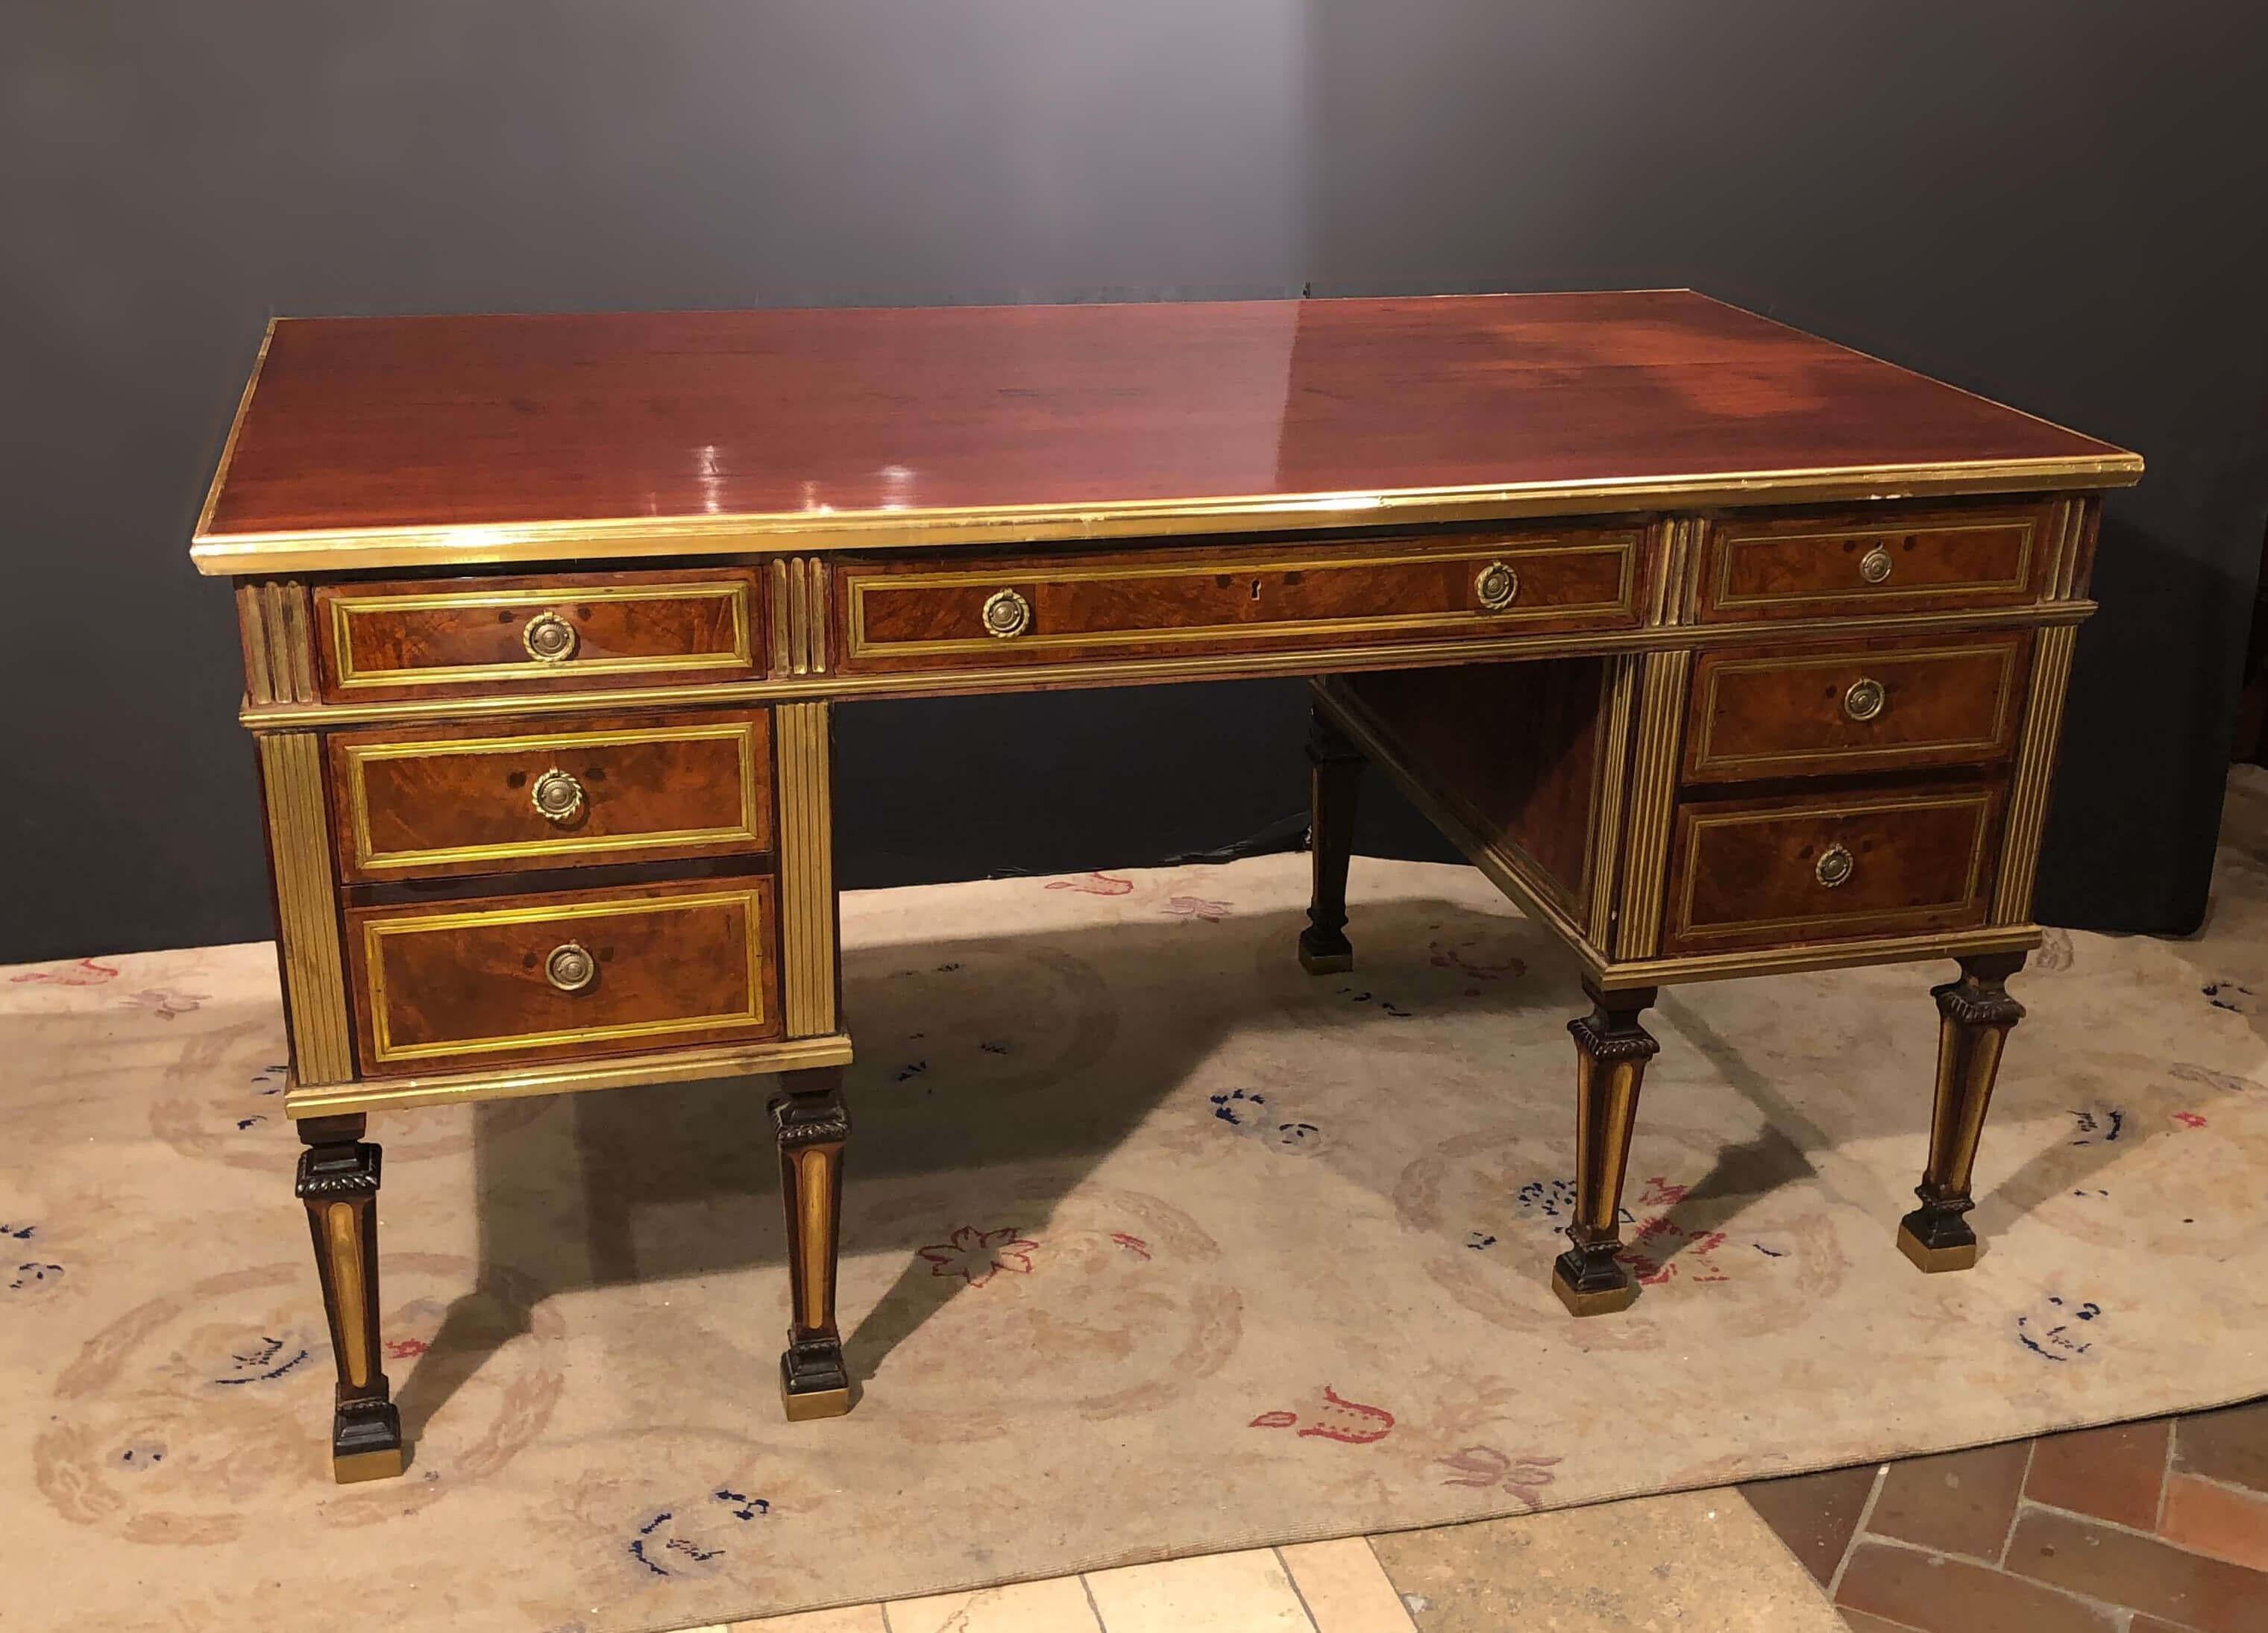 A large Russian neoclassic mahogany desk with brass trim and moldings, on square tapered and fluted legs.